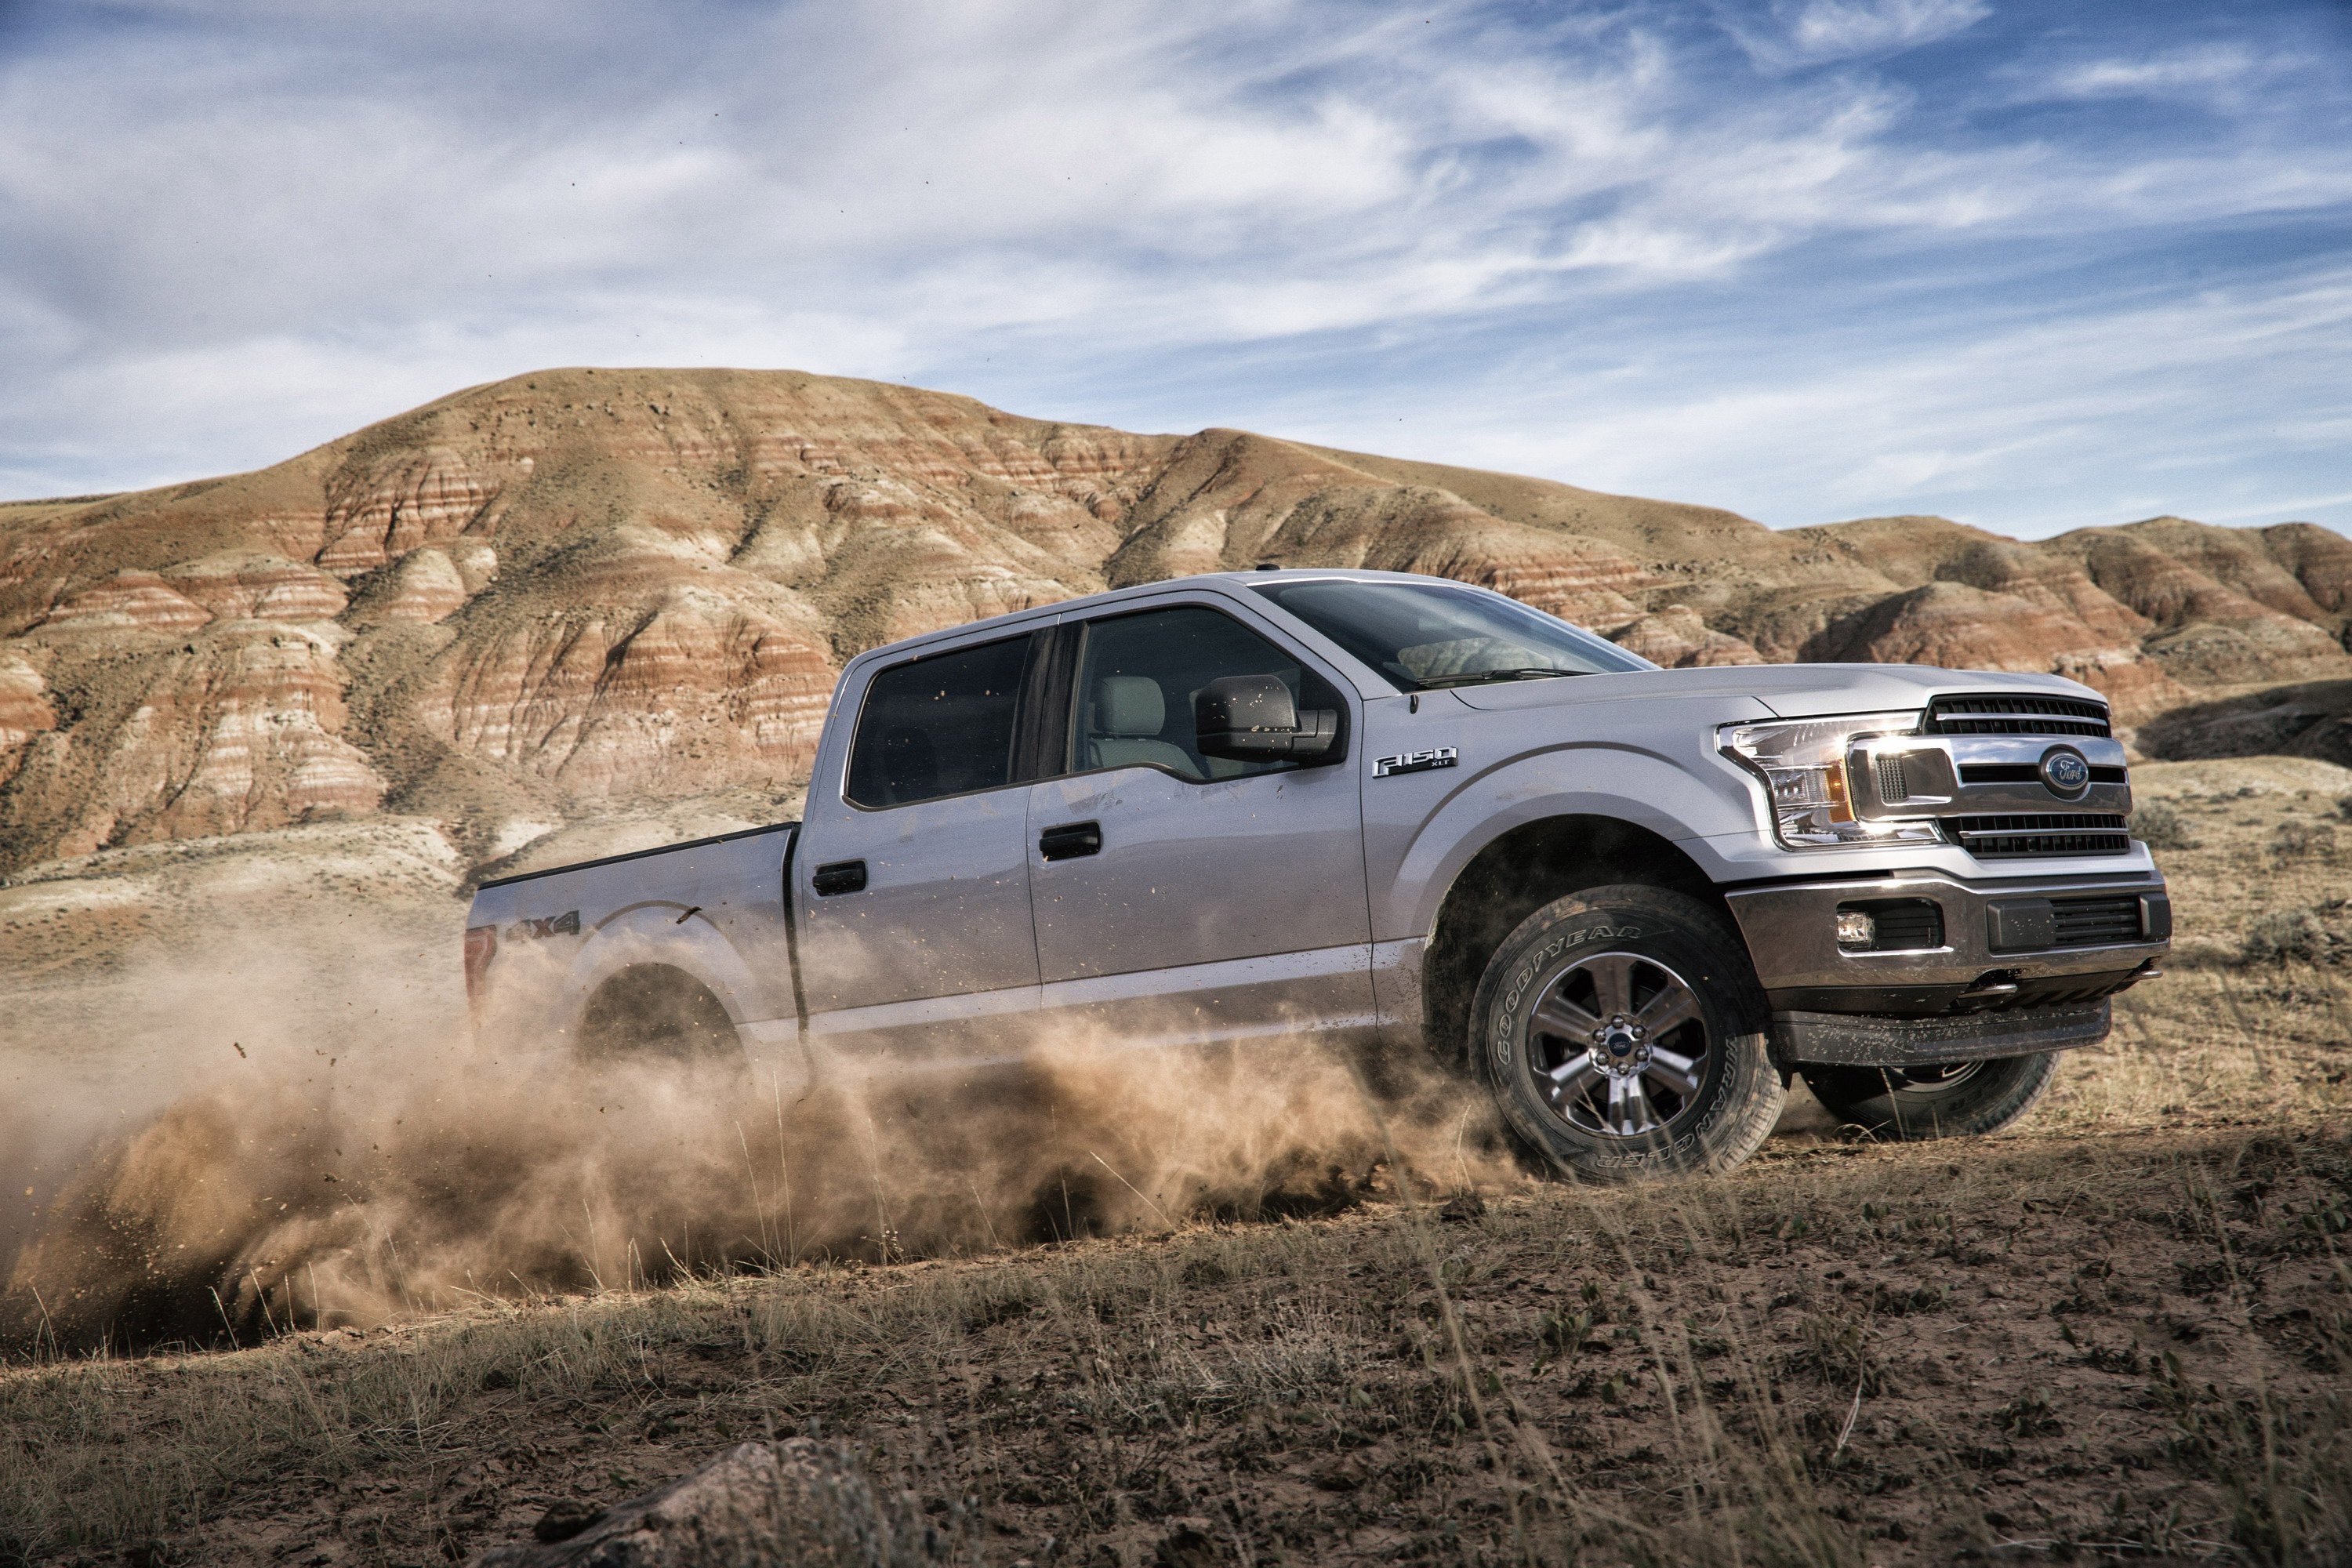 3000x2000 Wallpaper of the Day: 2018 Ford F-150